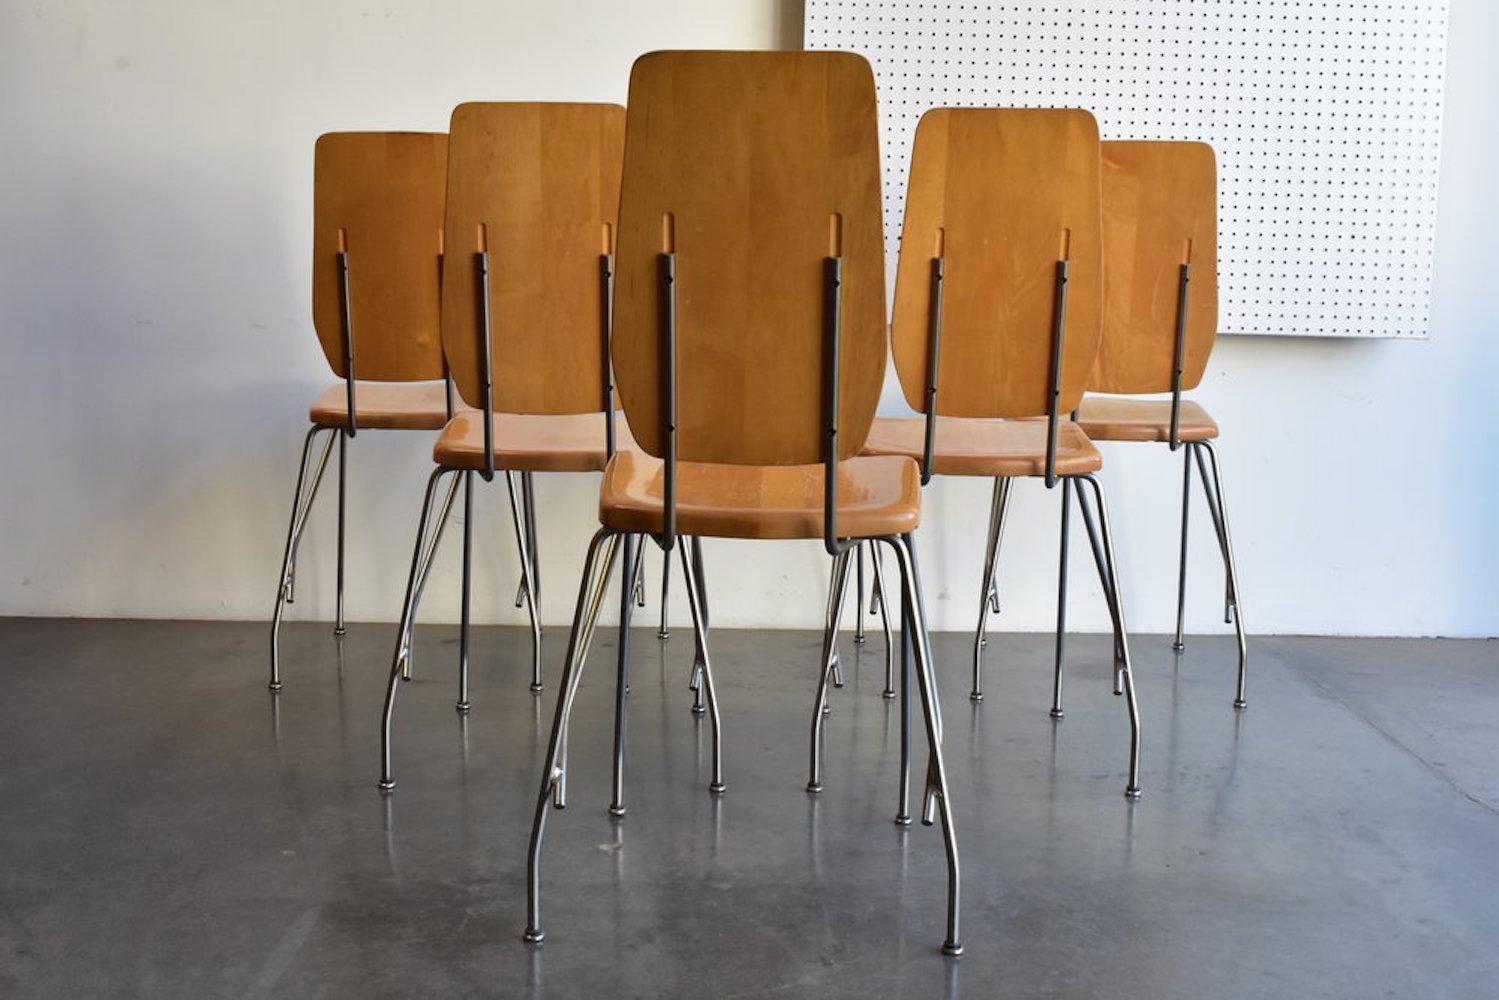 Six dining chairs by Robert Josten, circa 1970s. Aluminum legs and base with maple back rest and seat. Each chair measures 14.5